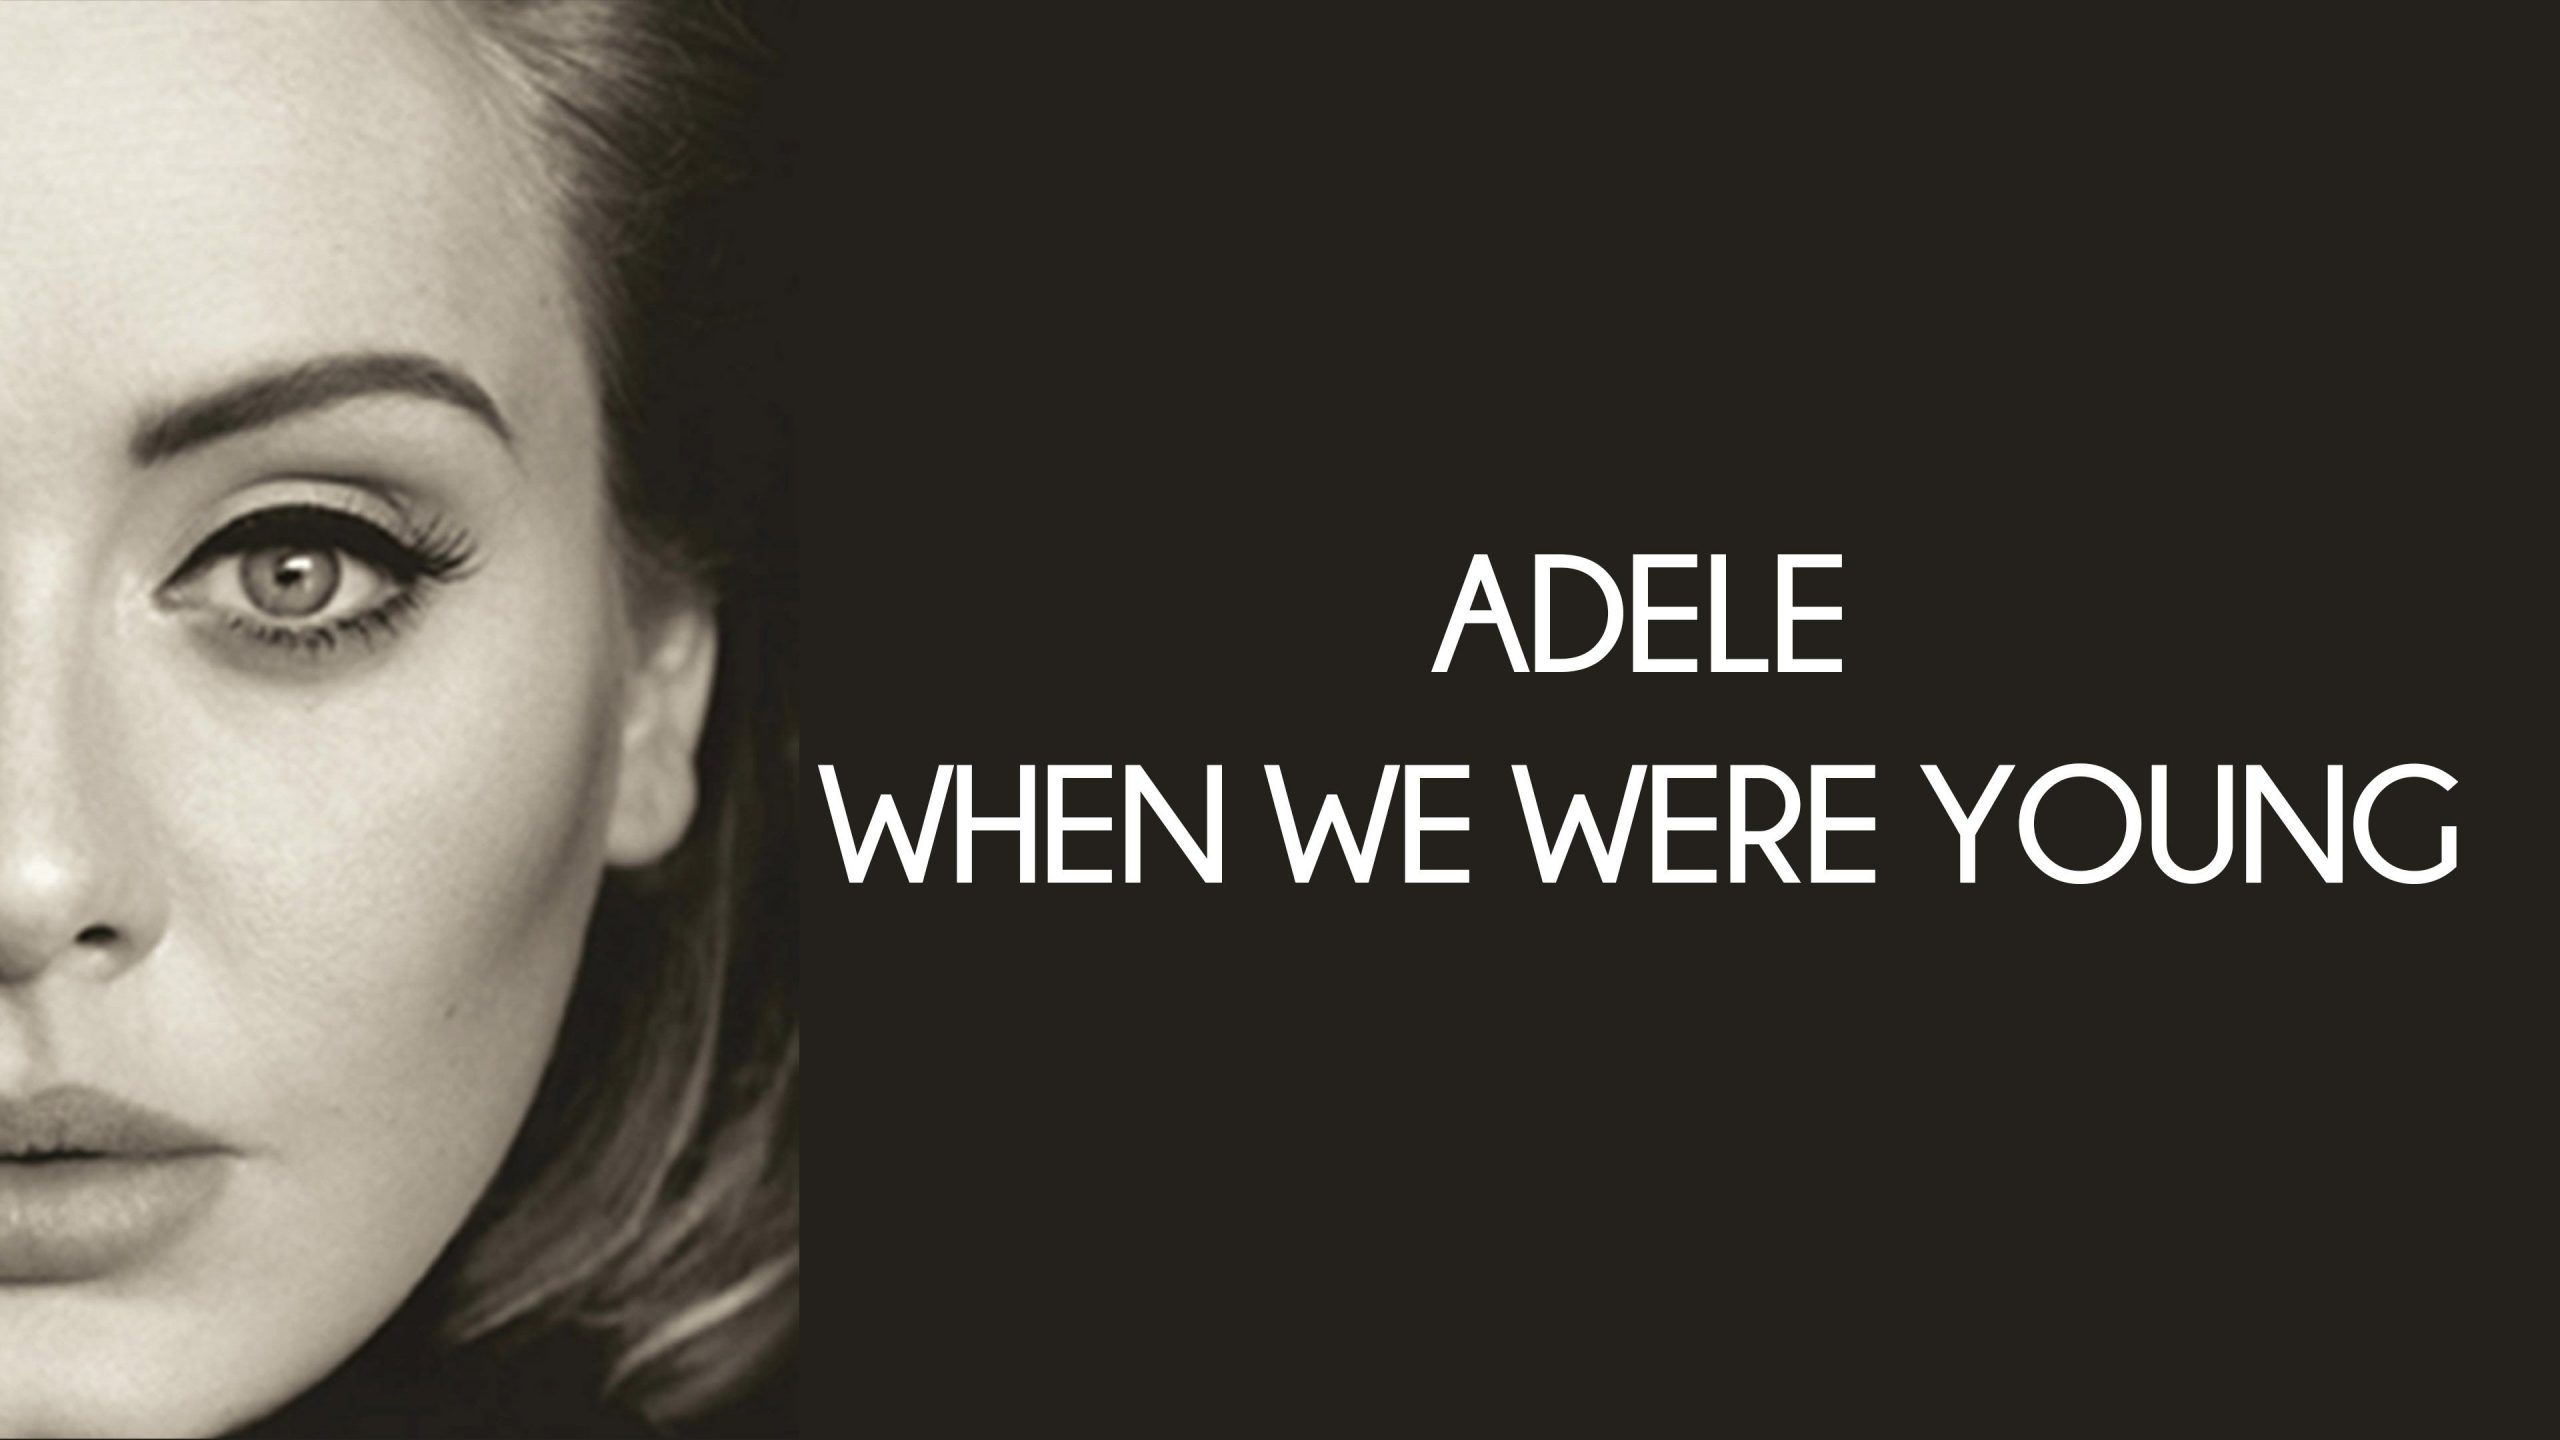 Adele - When We Were Young mp3 download